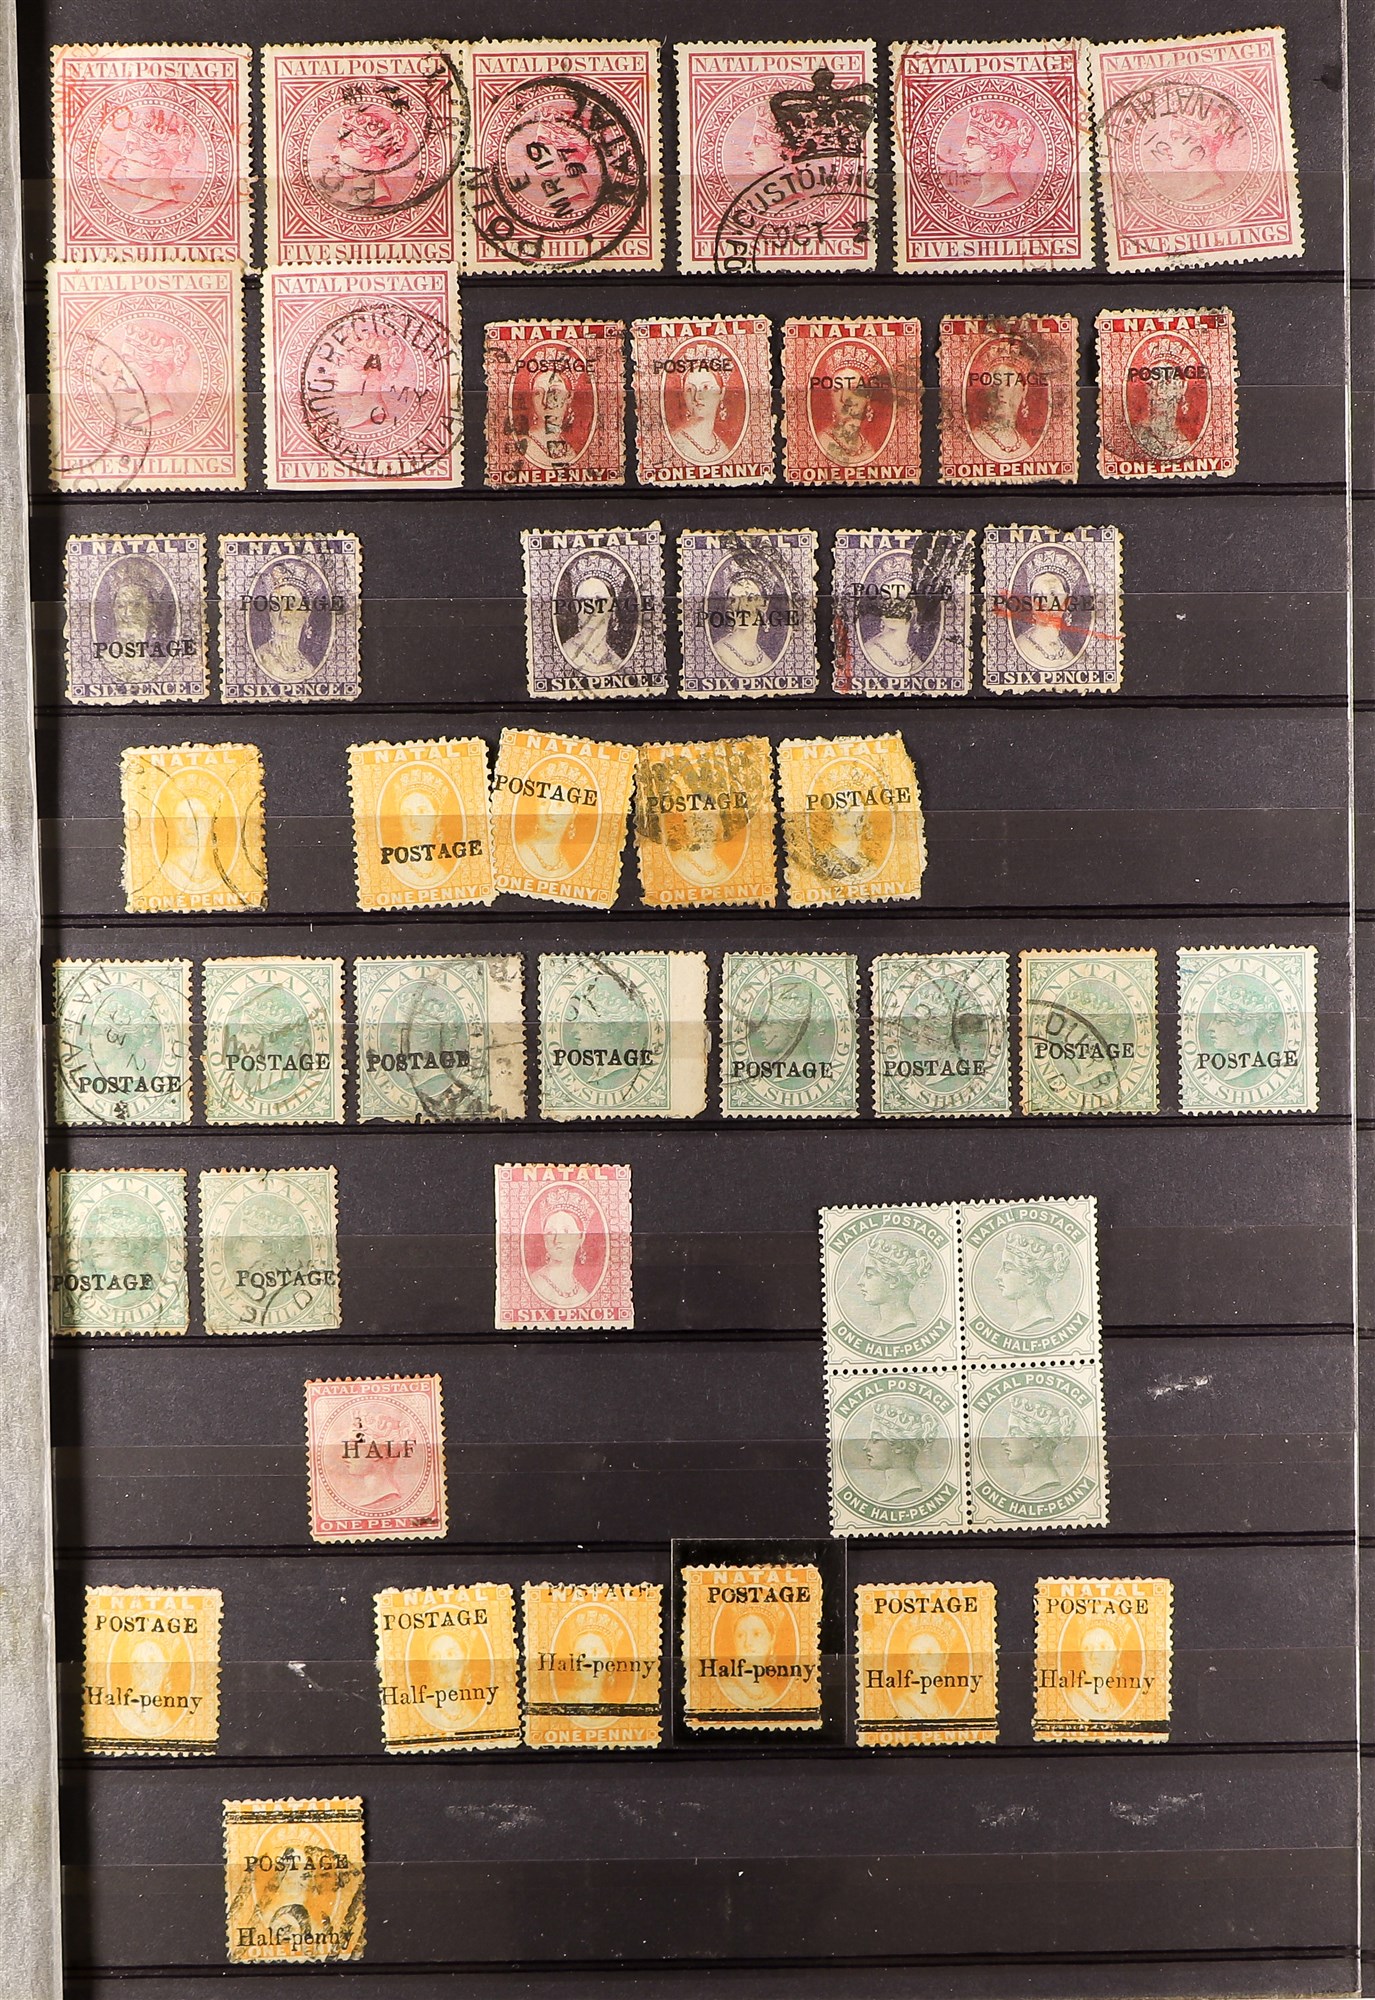 SOUTH AFRICA -COLS & REPS NATAL 1859-1899 collection with values to 5s (mostly used), 1860 rough - Image 4 of 4